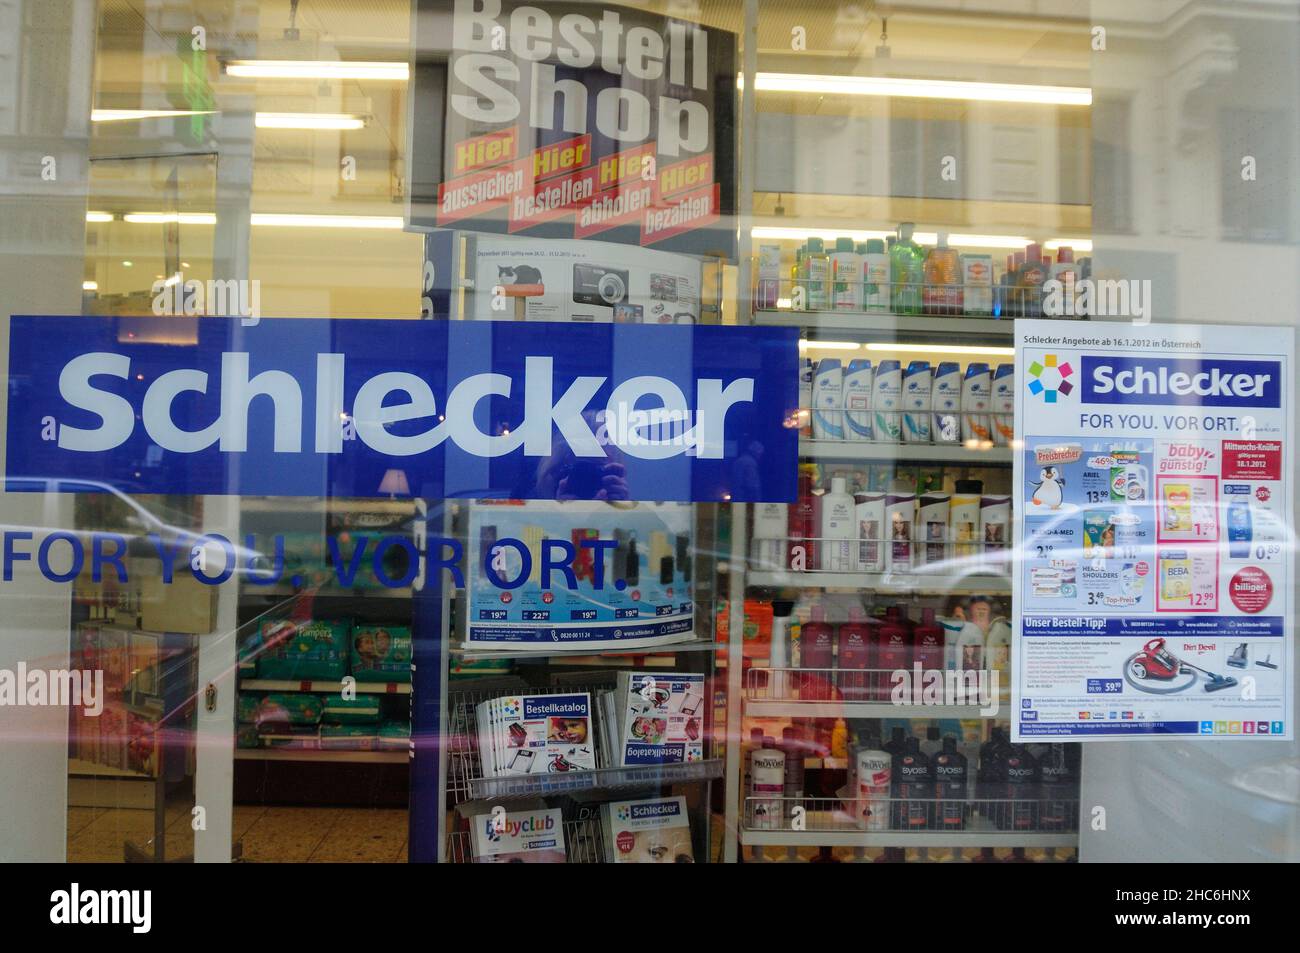 Vienna, Austria. January 21, 2012. The Schlecker drugstore is making its comeback in 2022. Patrick Landrock announces a re-launch of the drugstore chain 'Schlecker'. Stock Photo